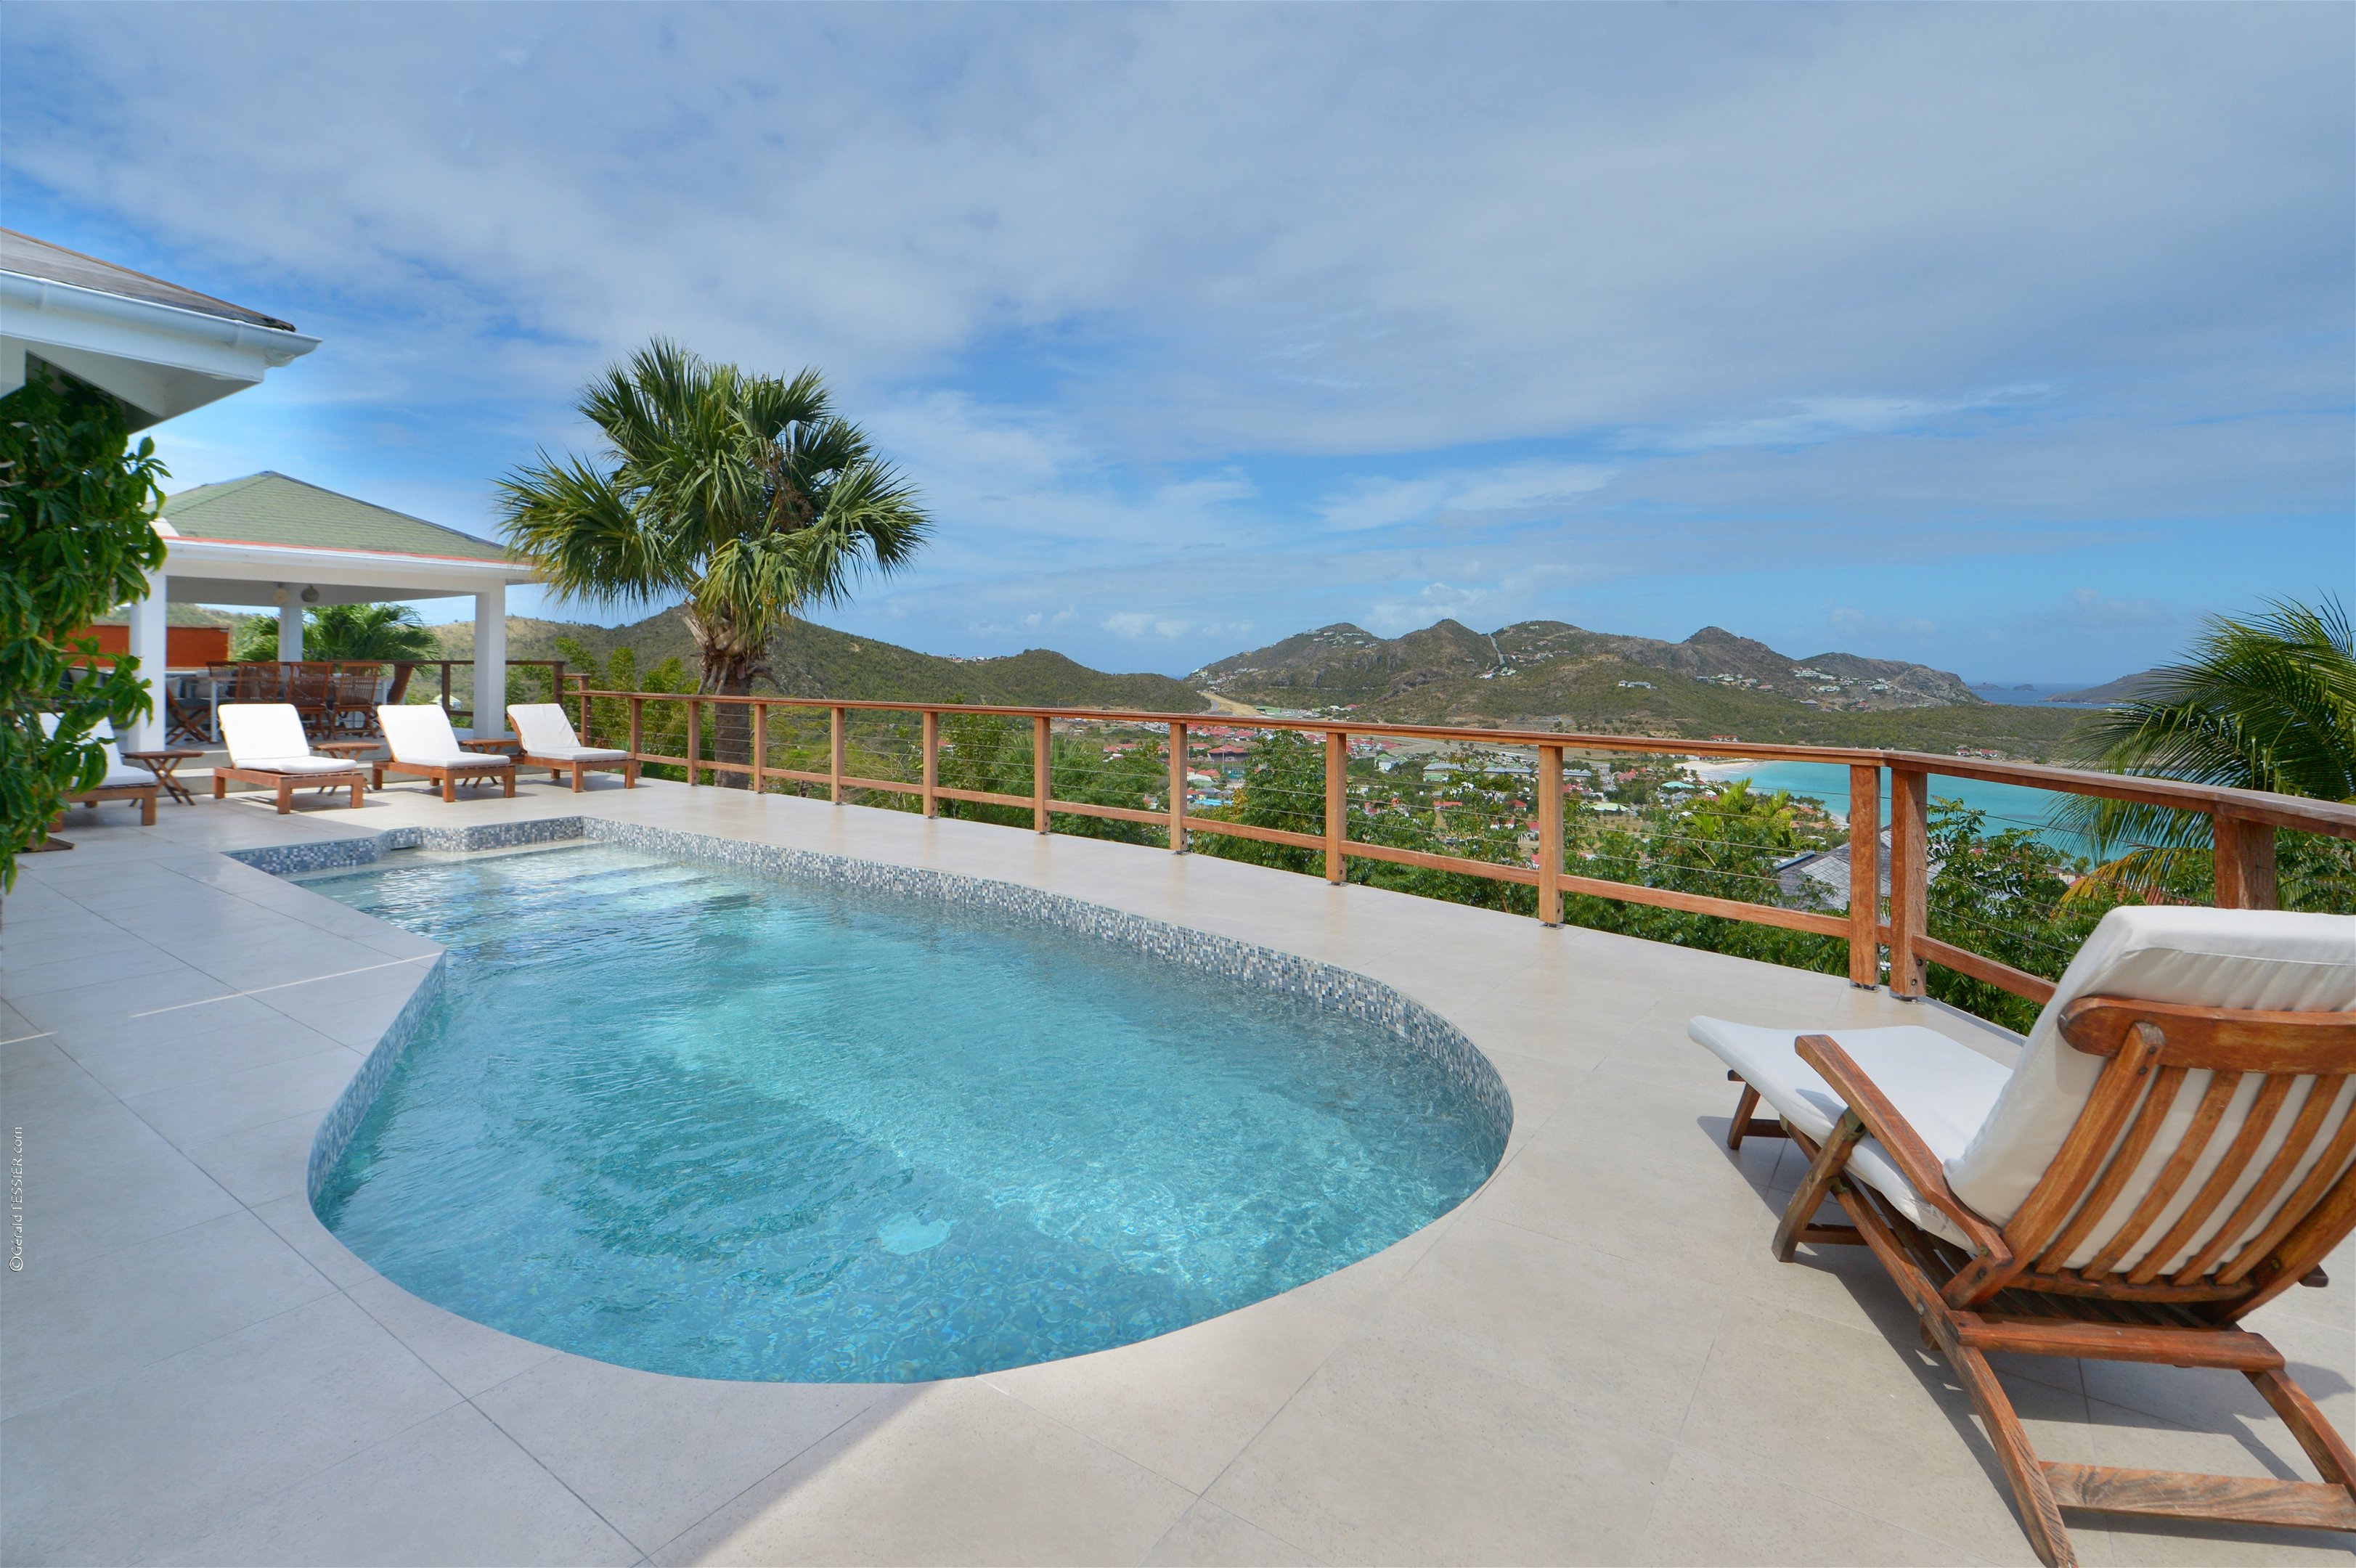 Beautiful pool, nice terrace with lounge area, deck chairs, and panoramic views over the bay. 